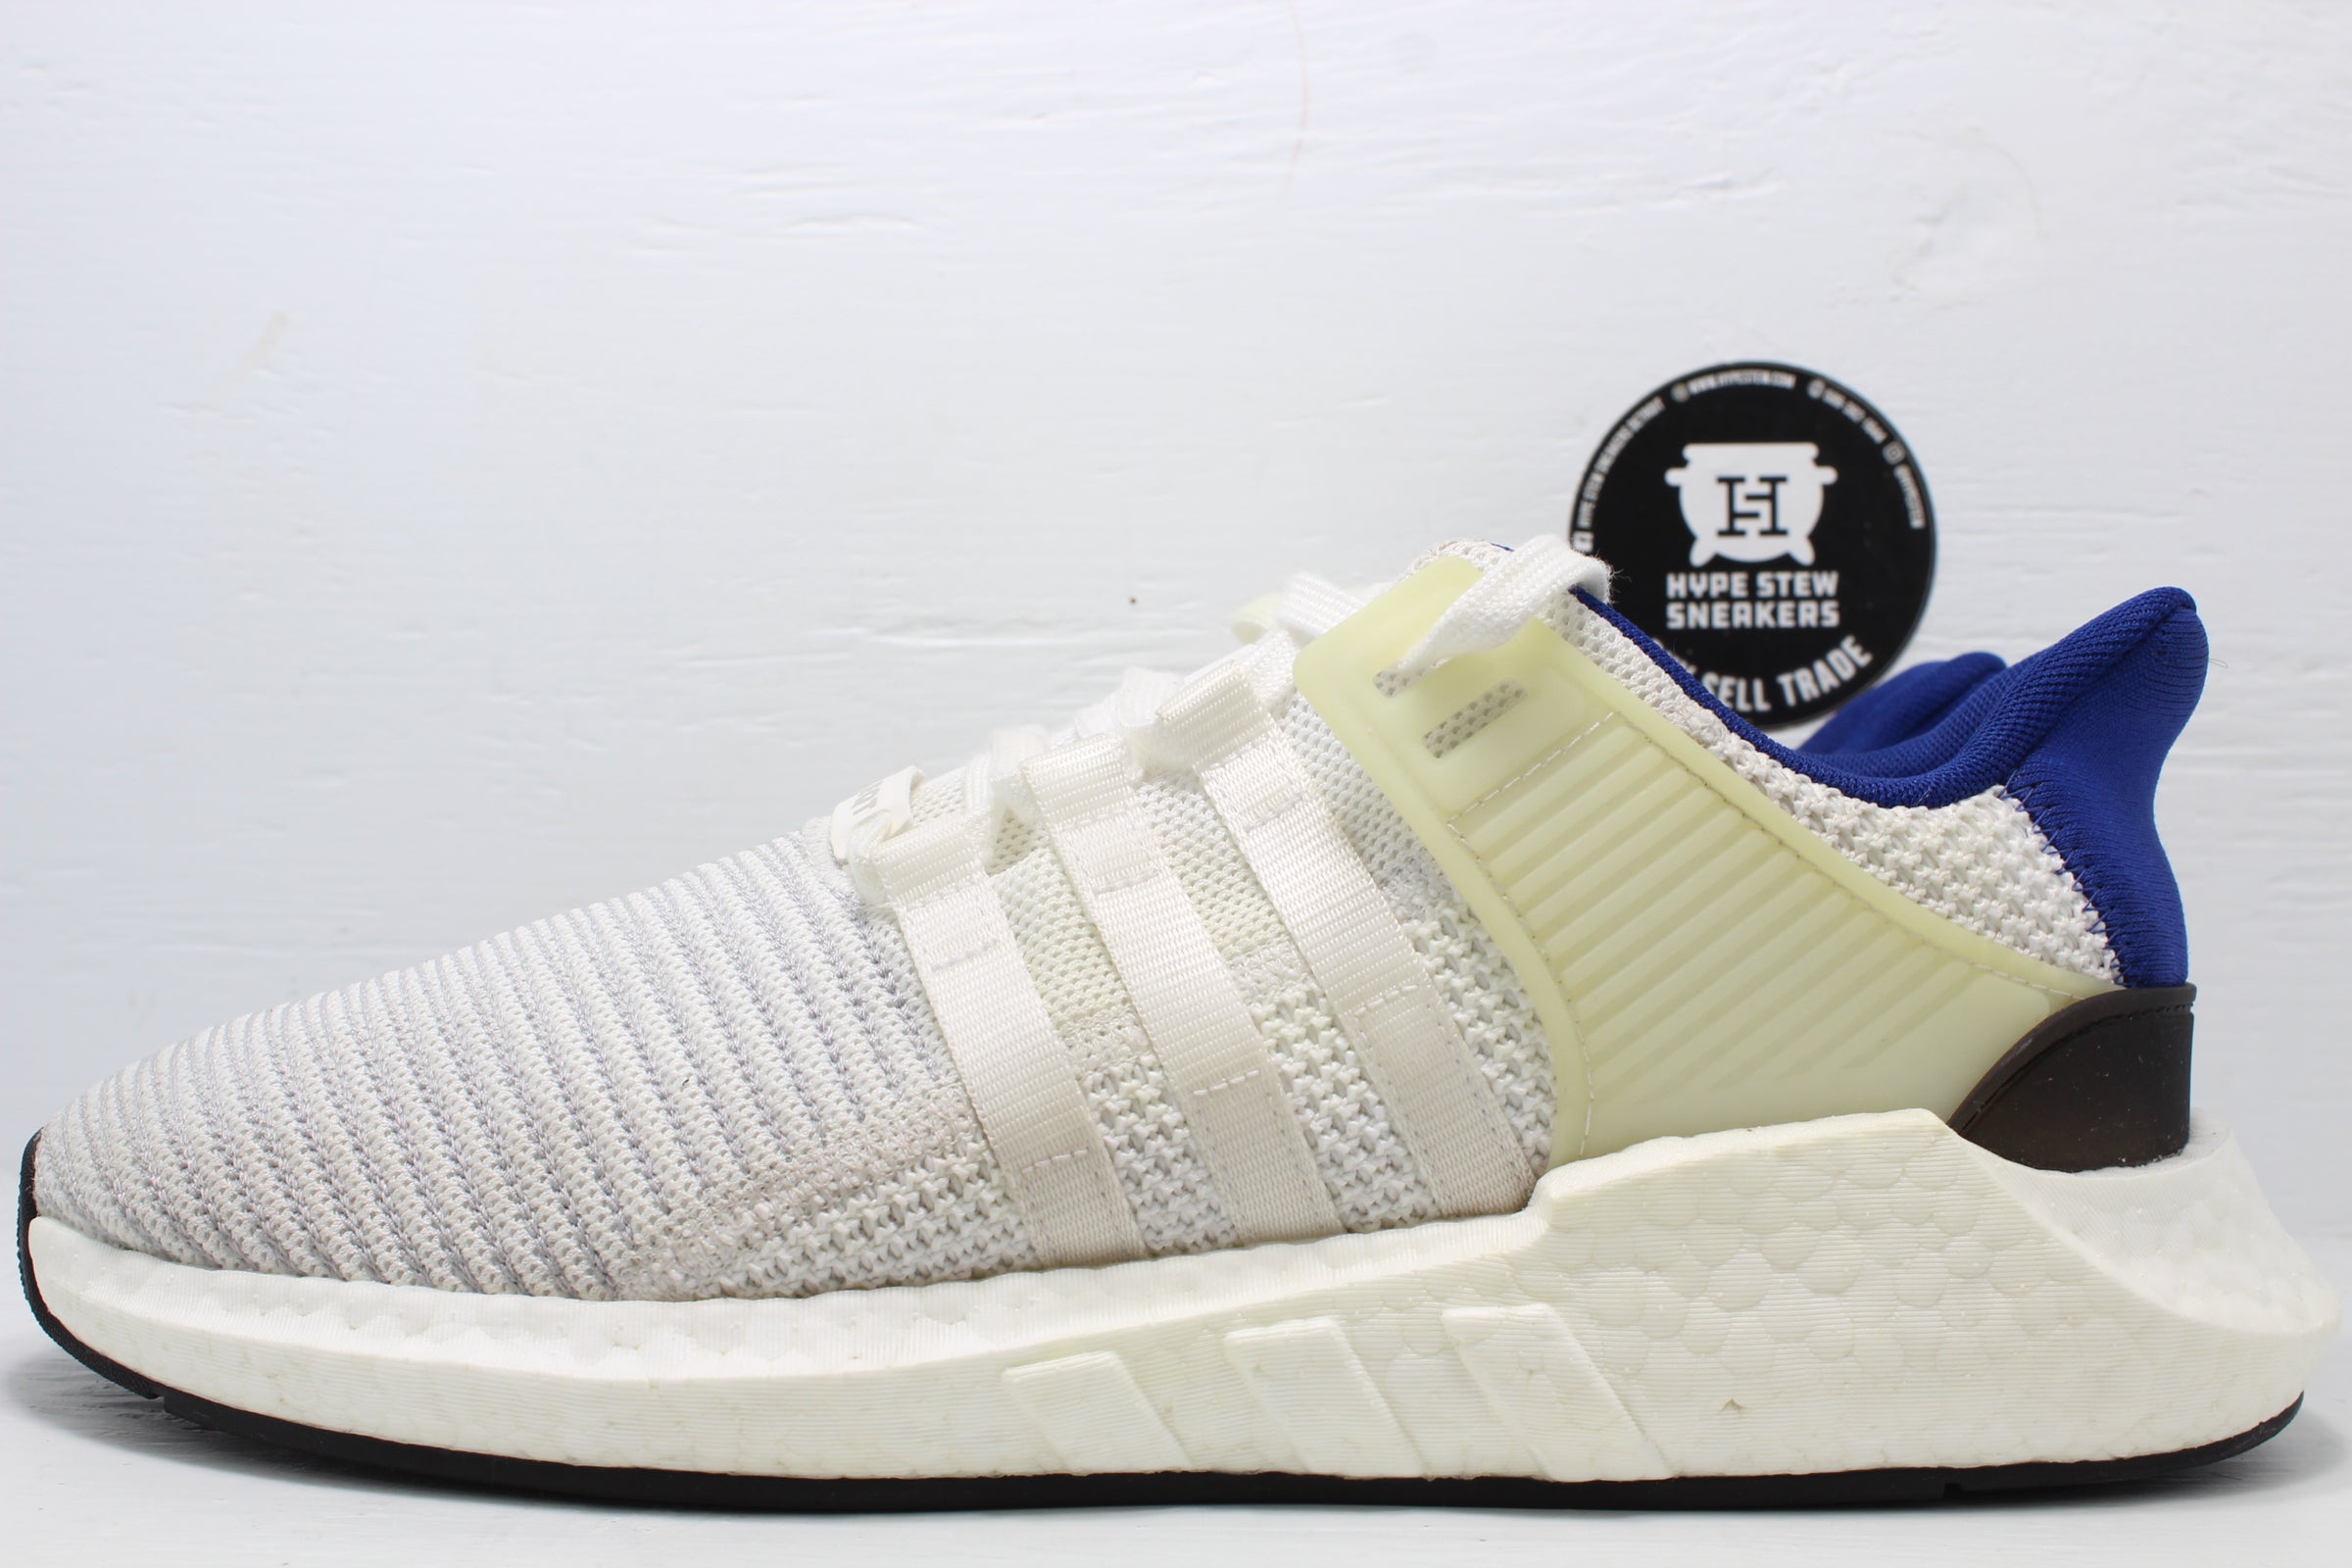 Adidas EQT Support 93/17 Royal | Hype Sneakers